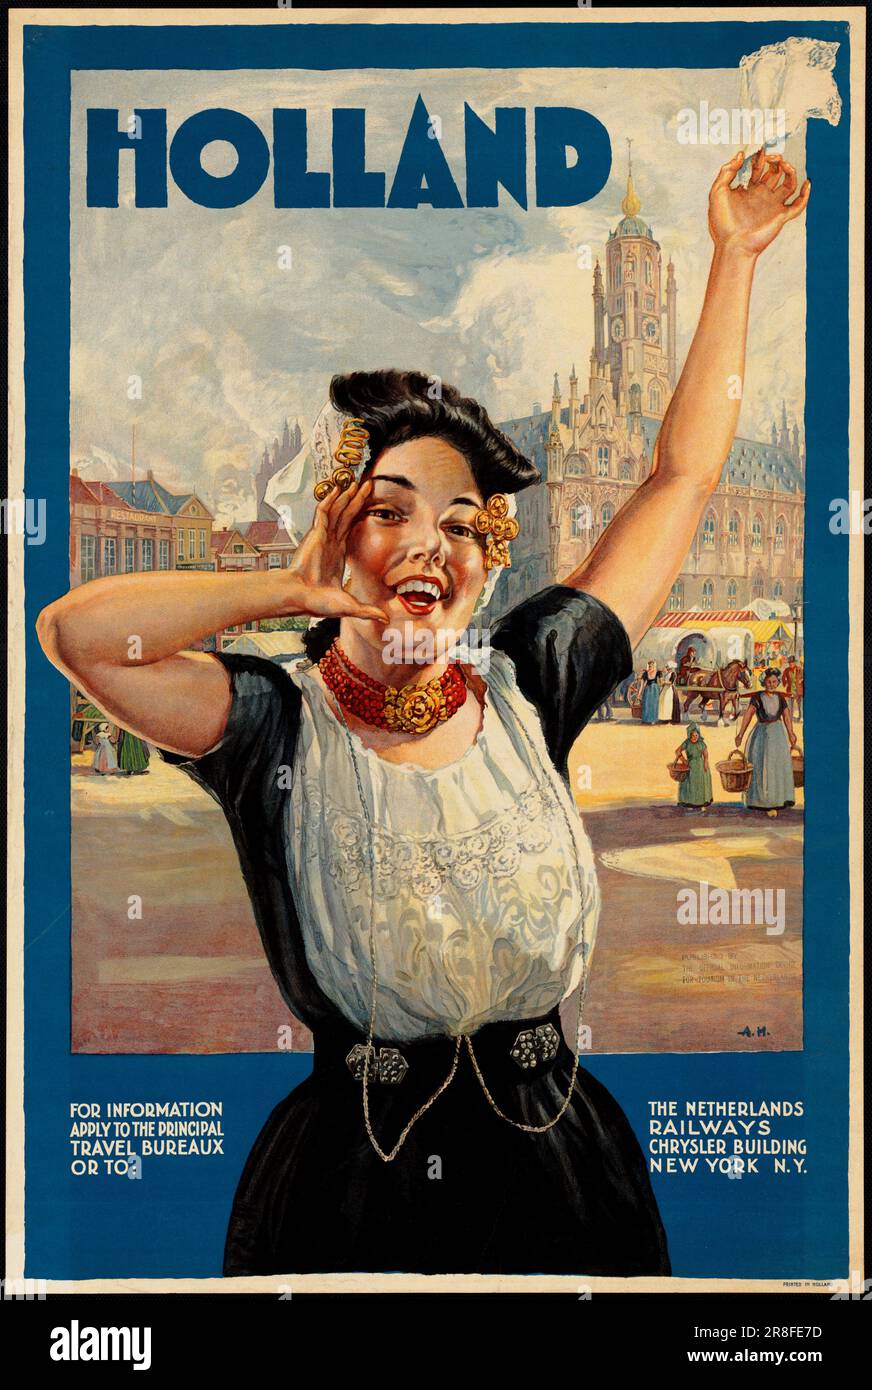 Vintage Travel Poster promoting tourism  Holland Stock Photo